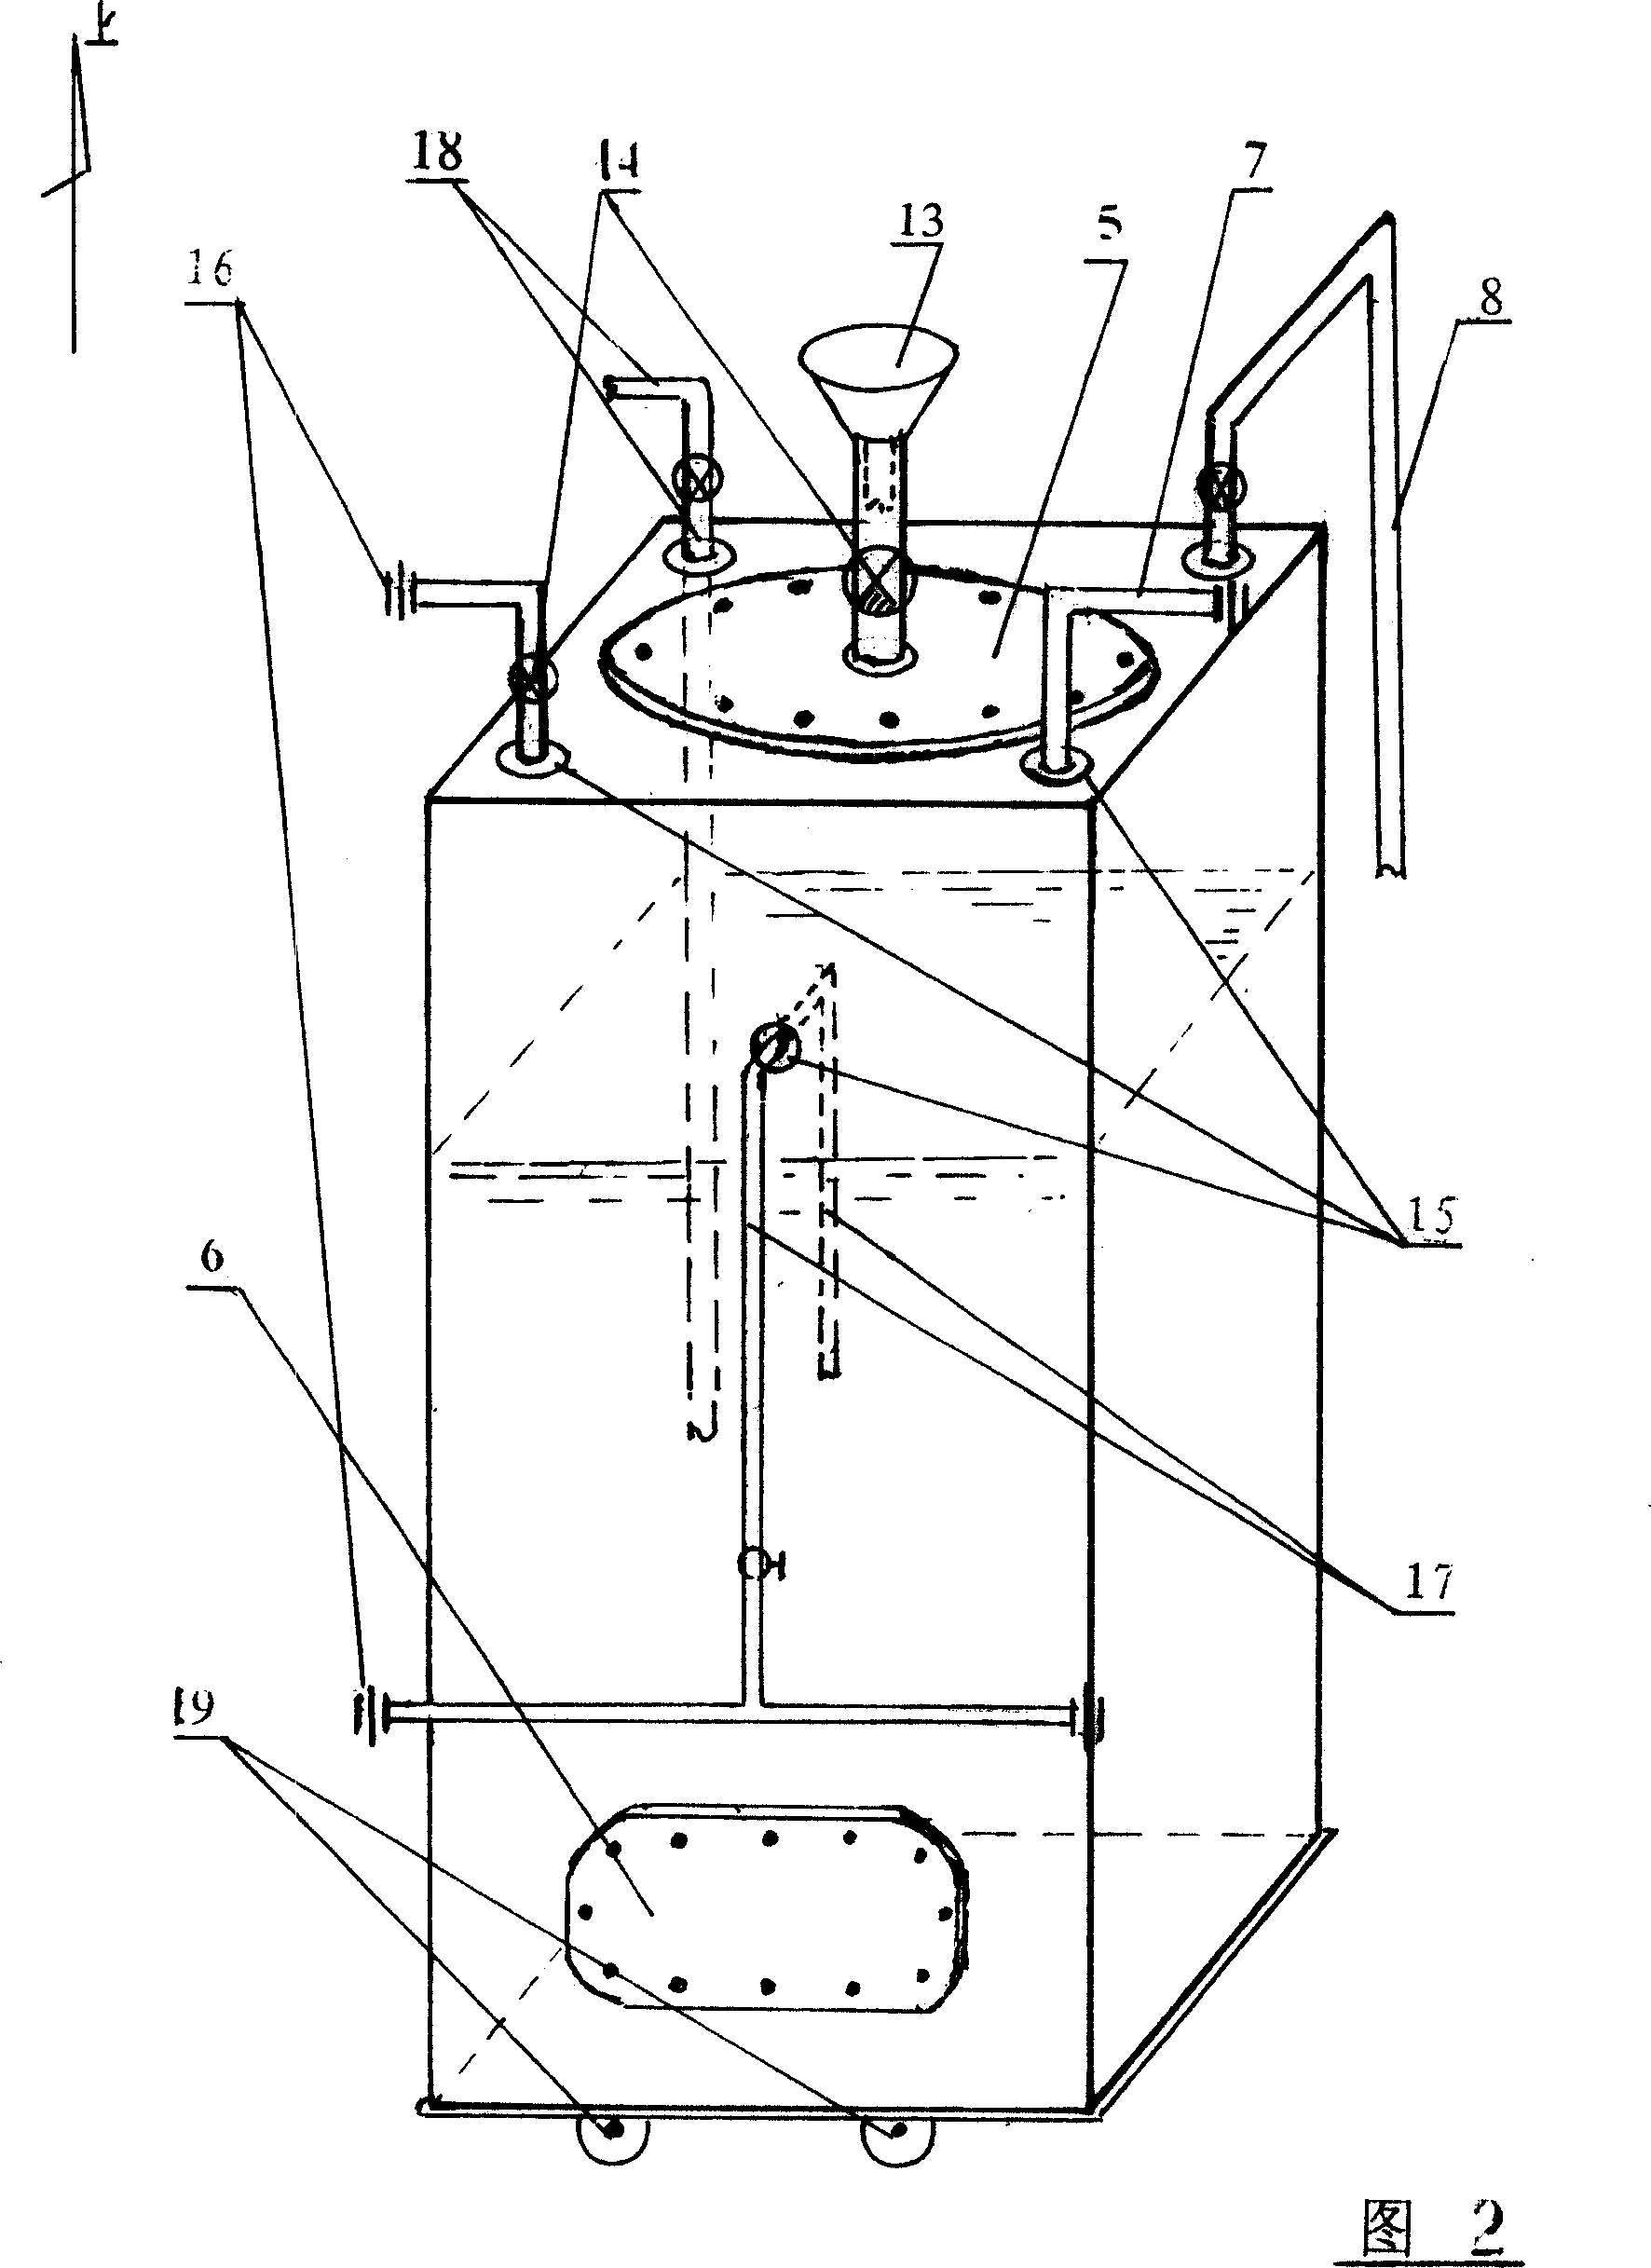 Marsh gas production device combined of standardized mechanism unit containers